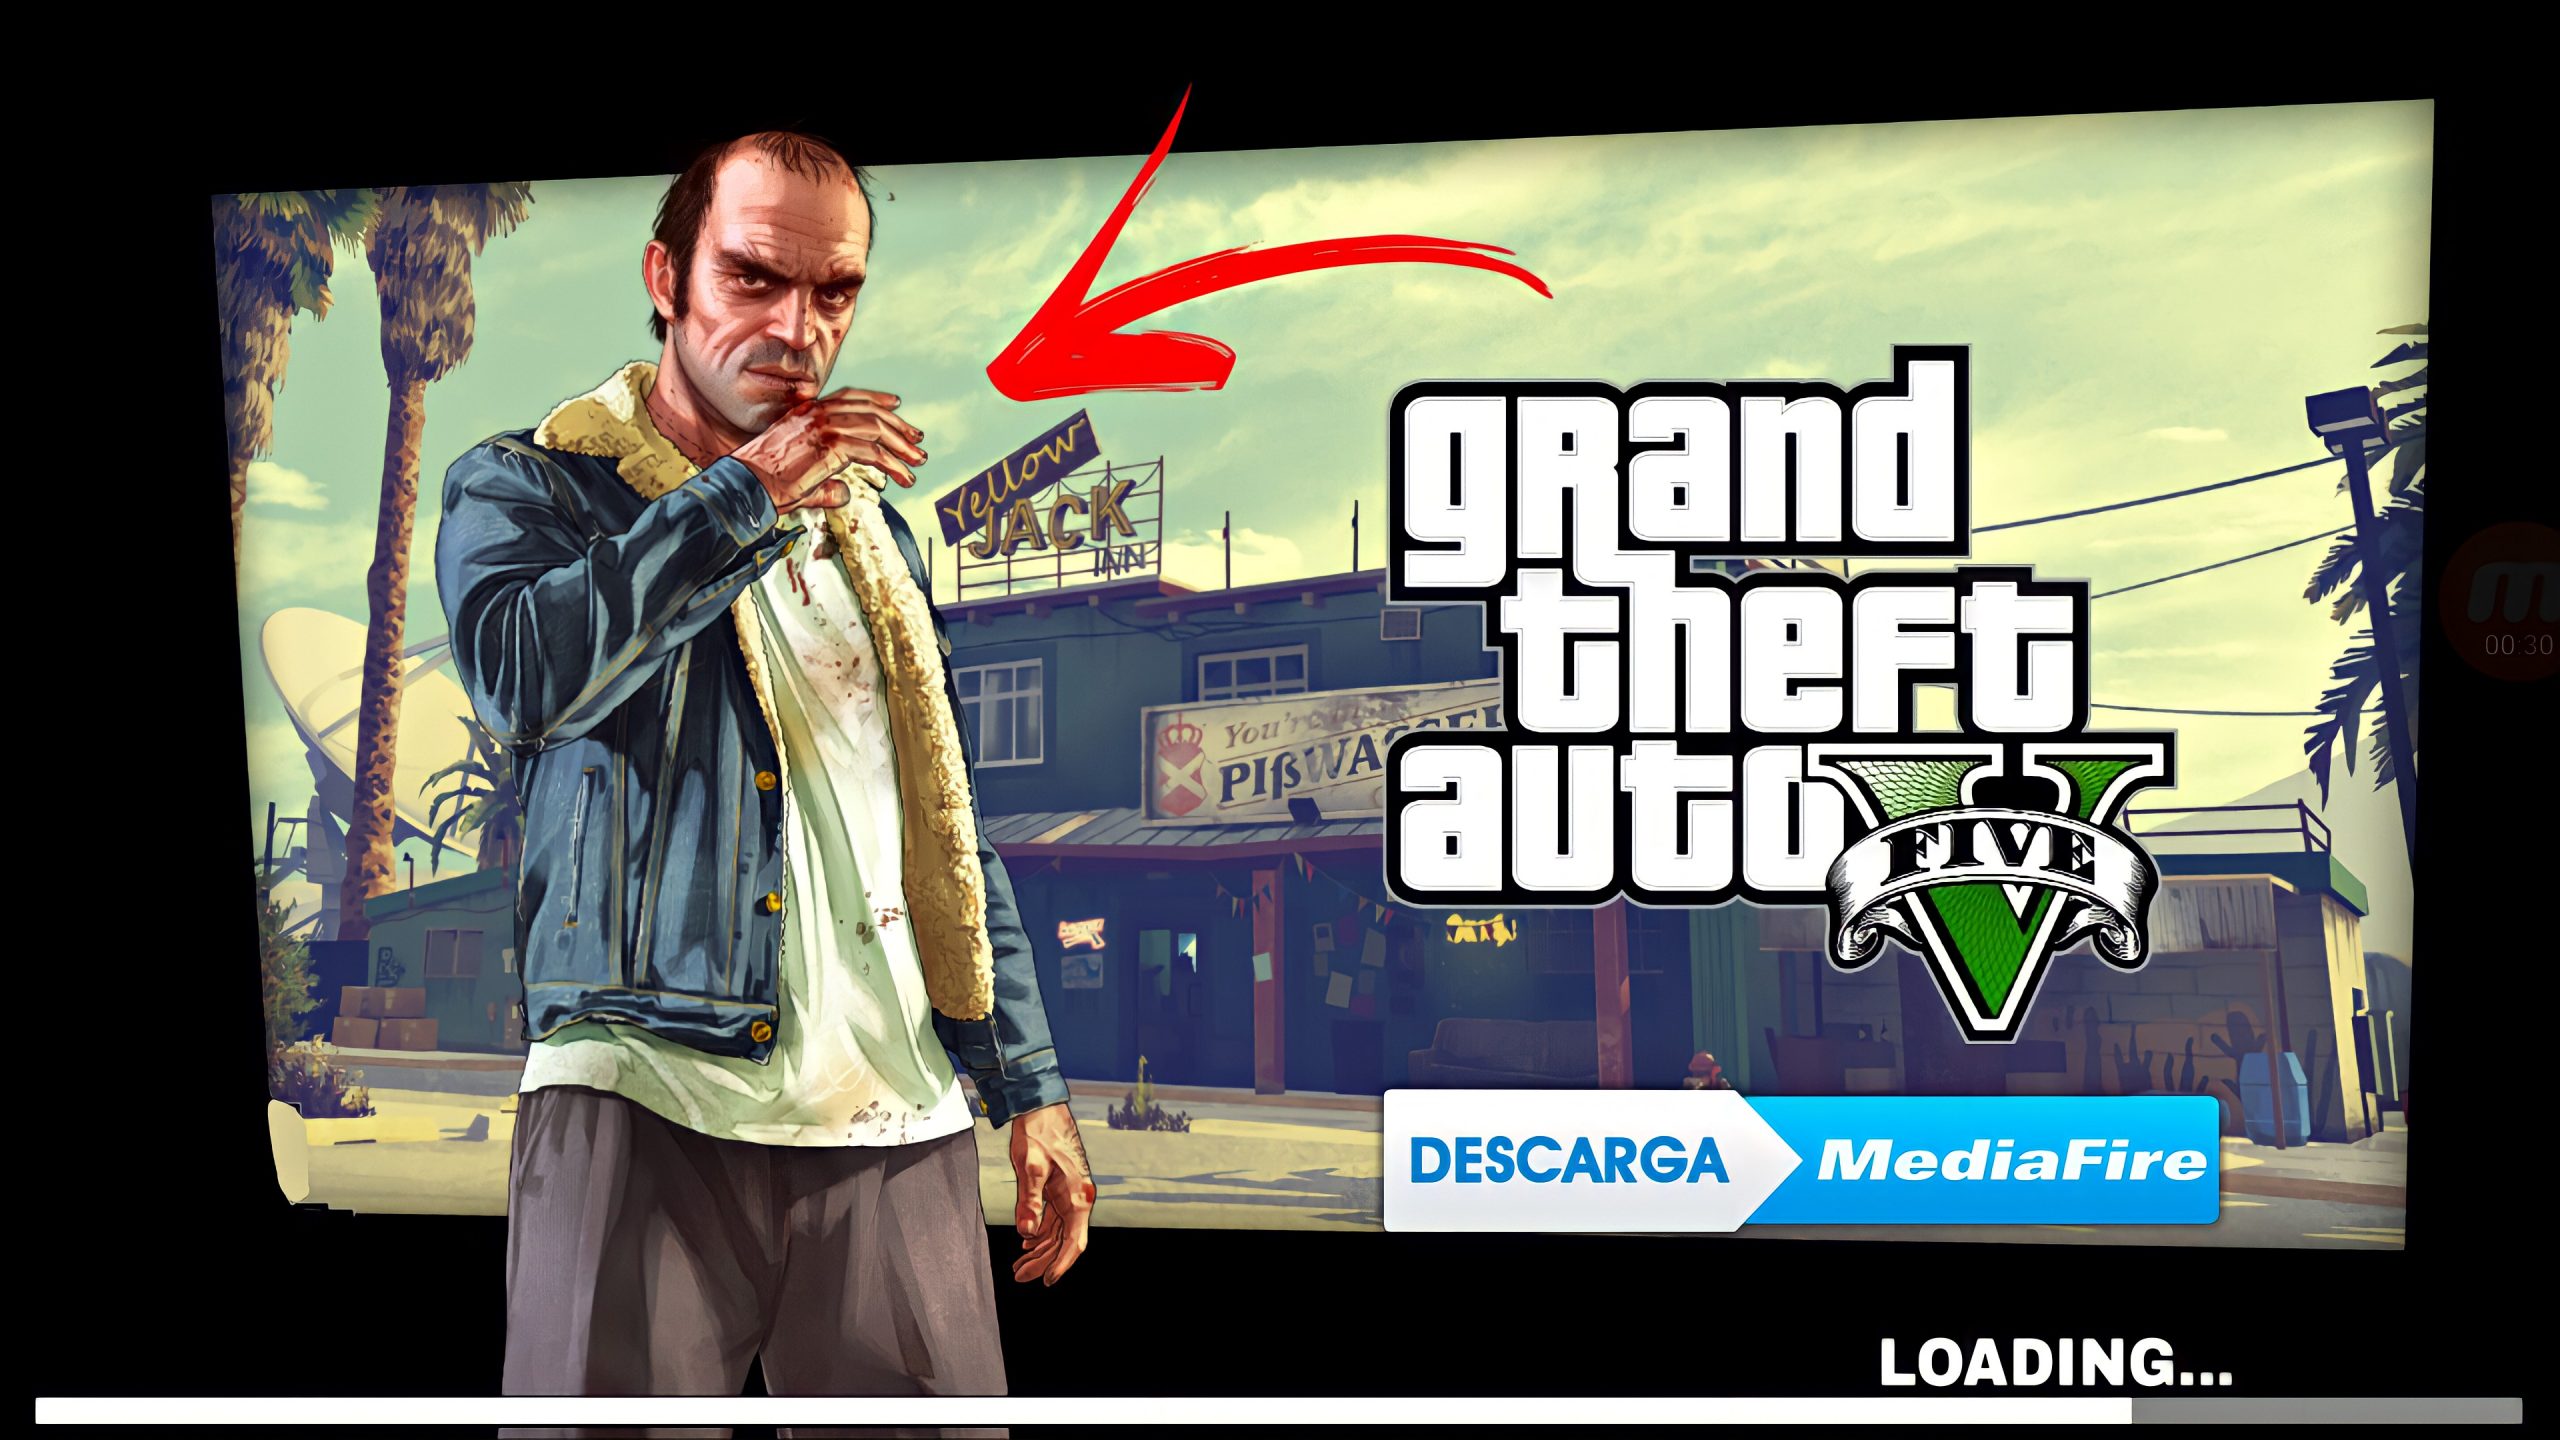 Download gta 5 android mediafire